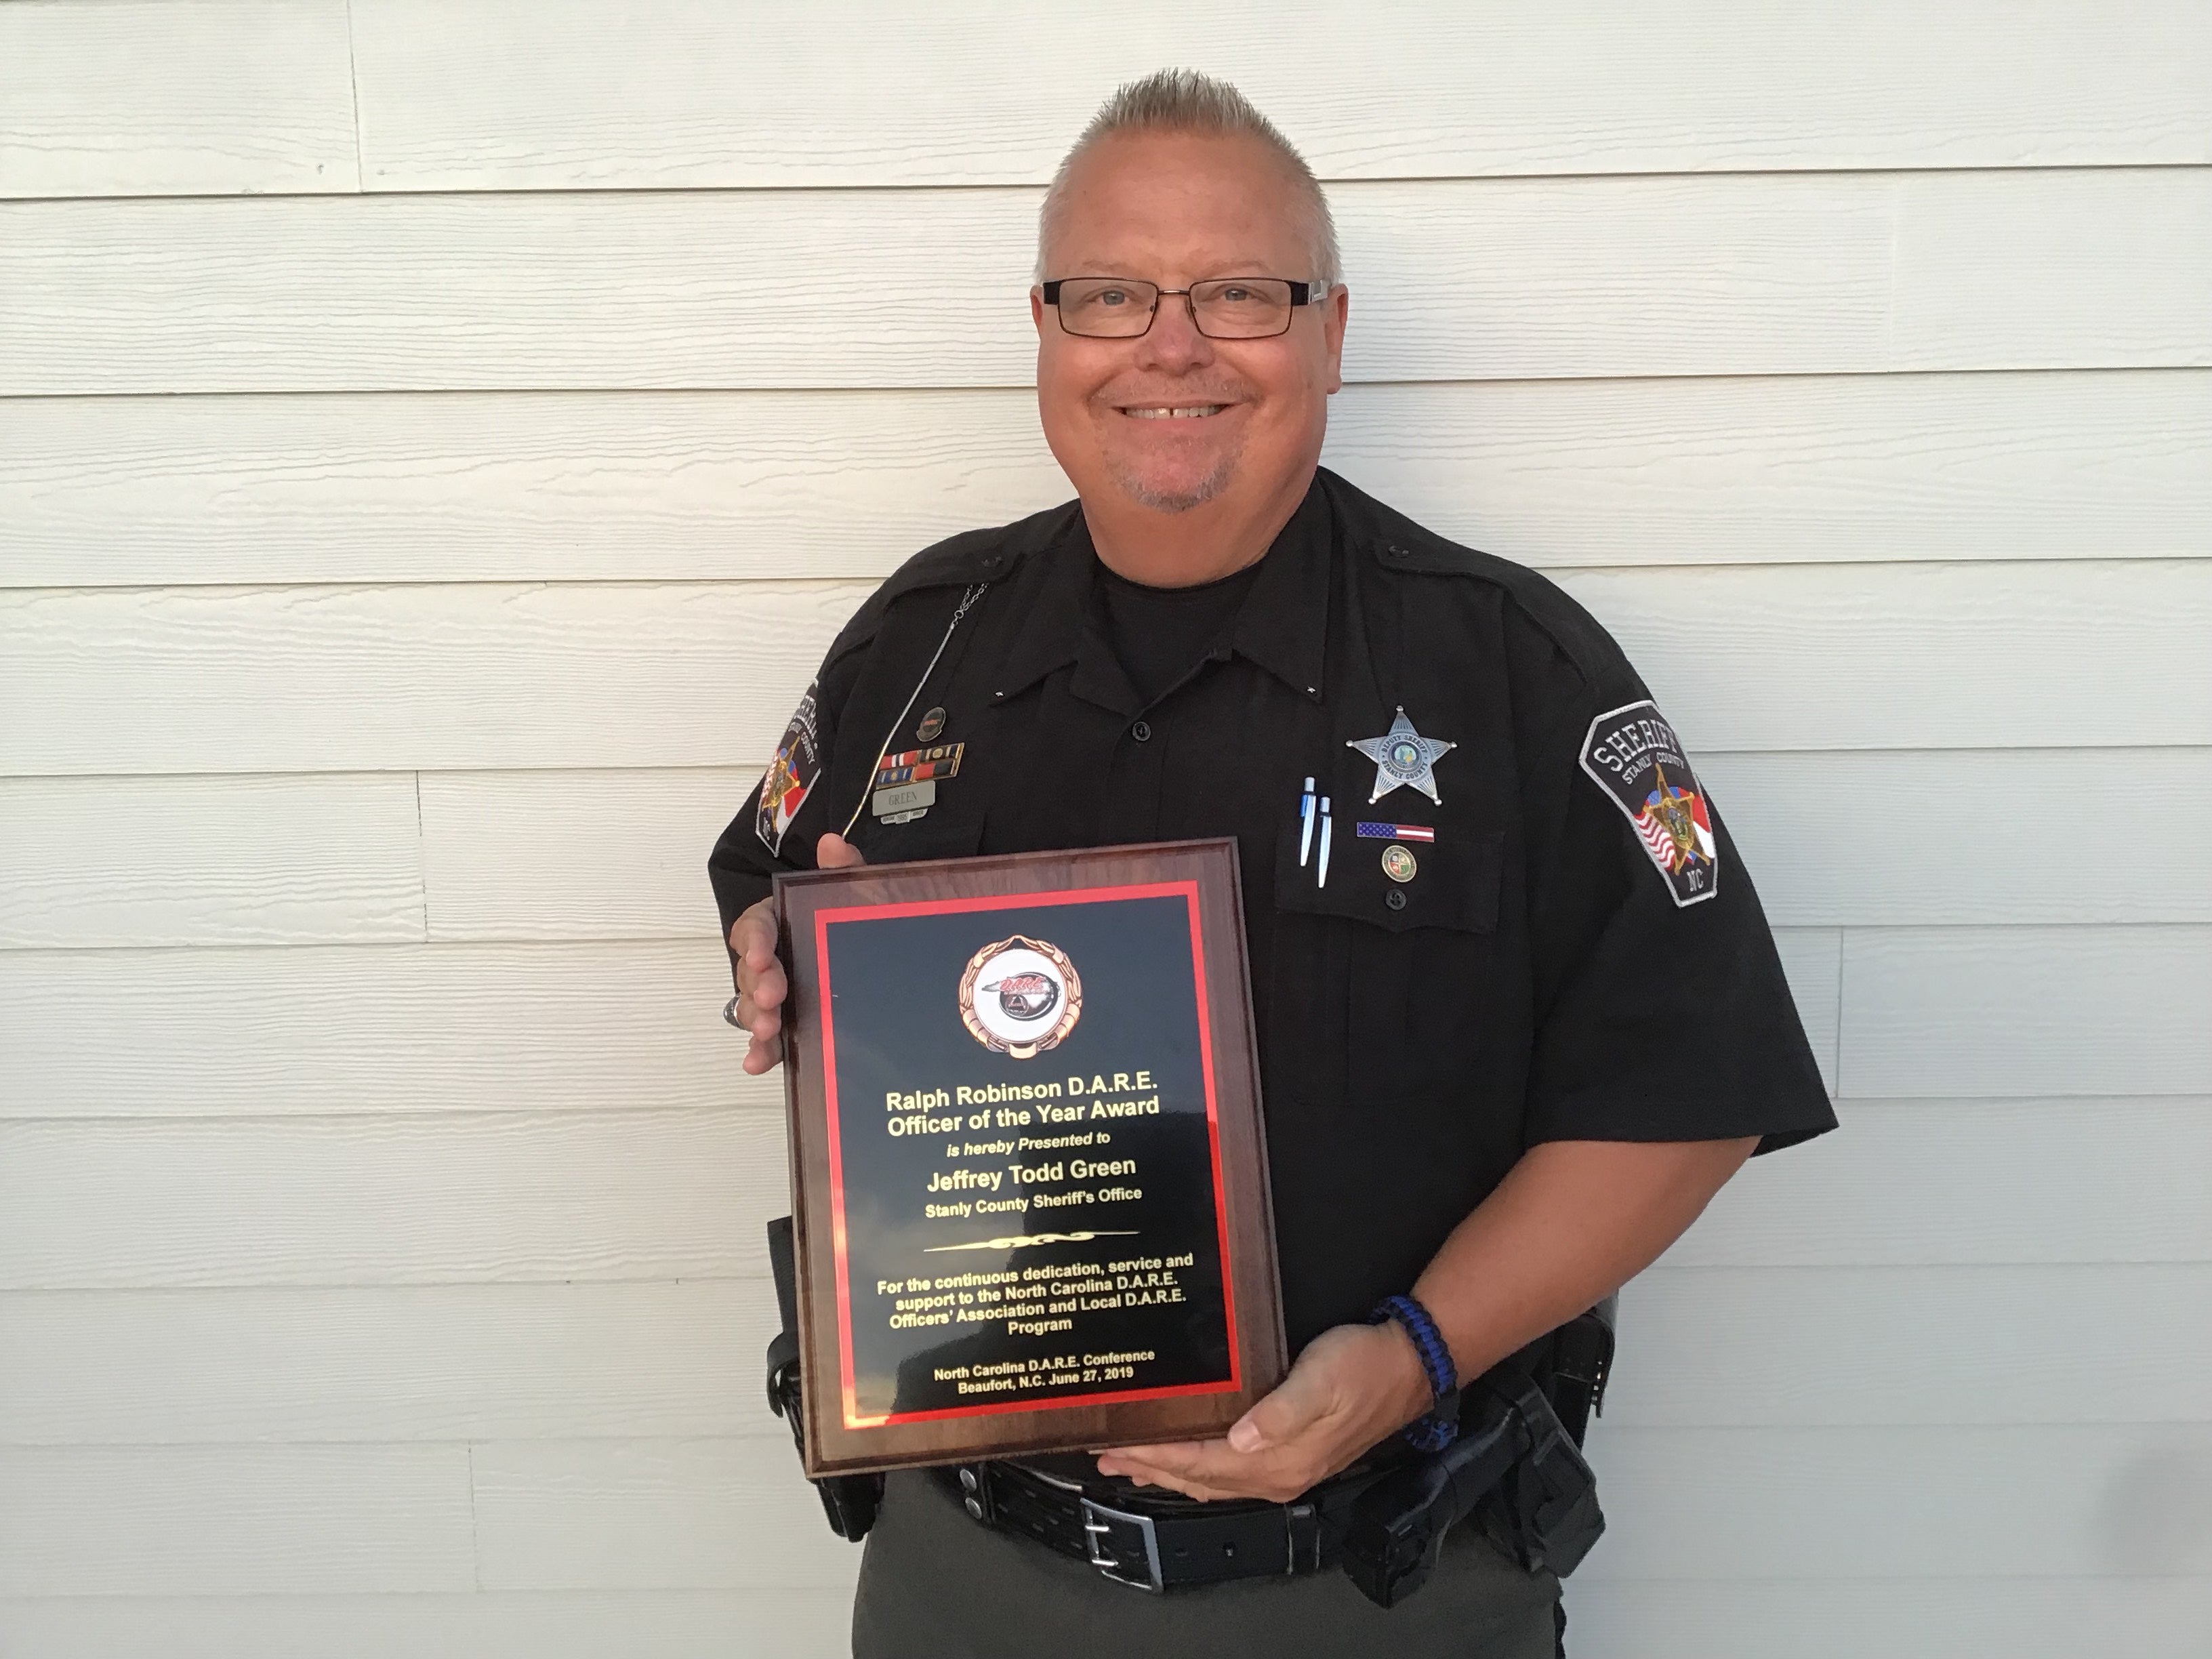 Green awarded D.A.R.E. officer of the year - The Stanly News & Press